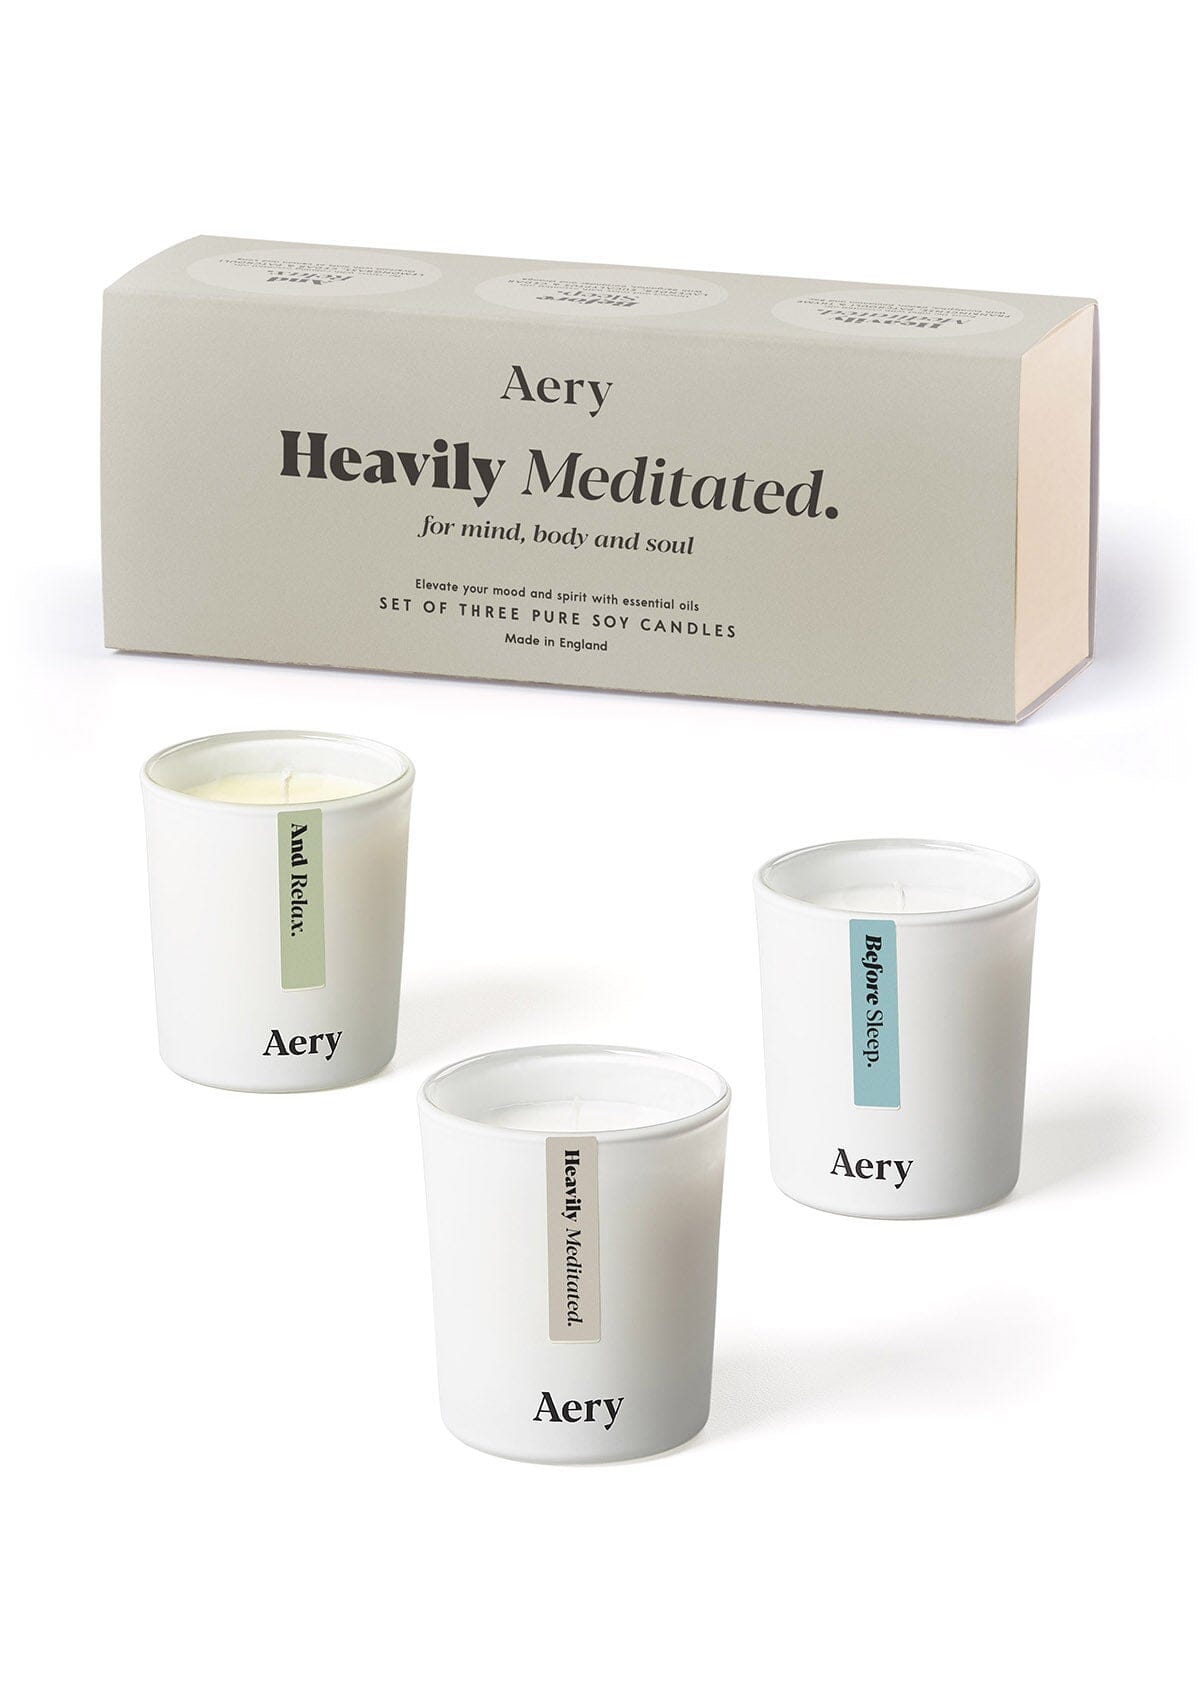 Beige Heavily Meditated candle set of three by Aery displayed next to product packaging 